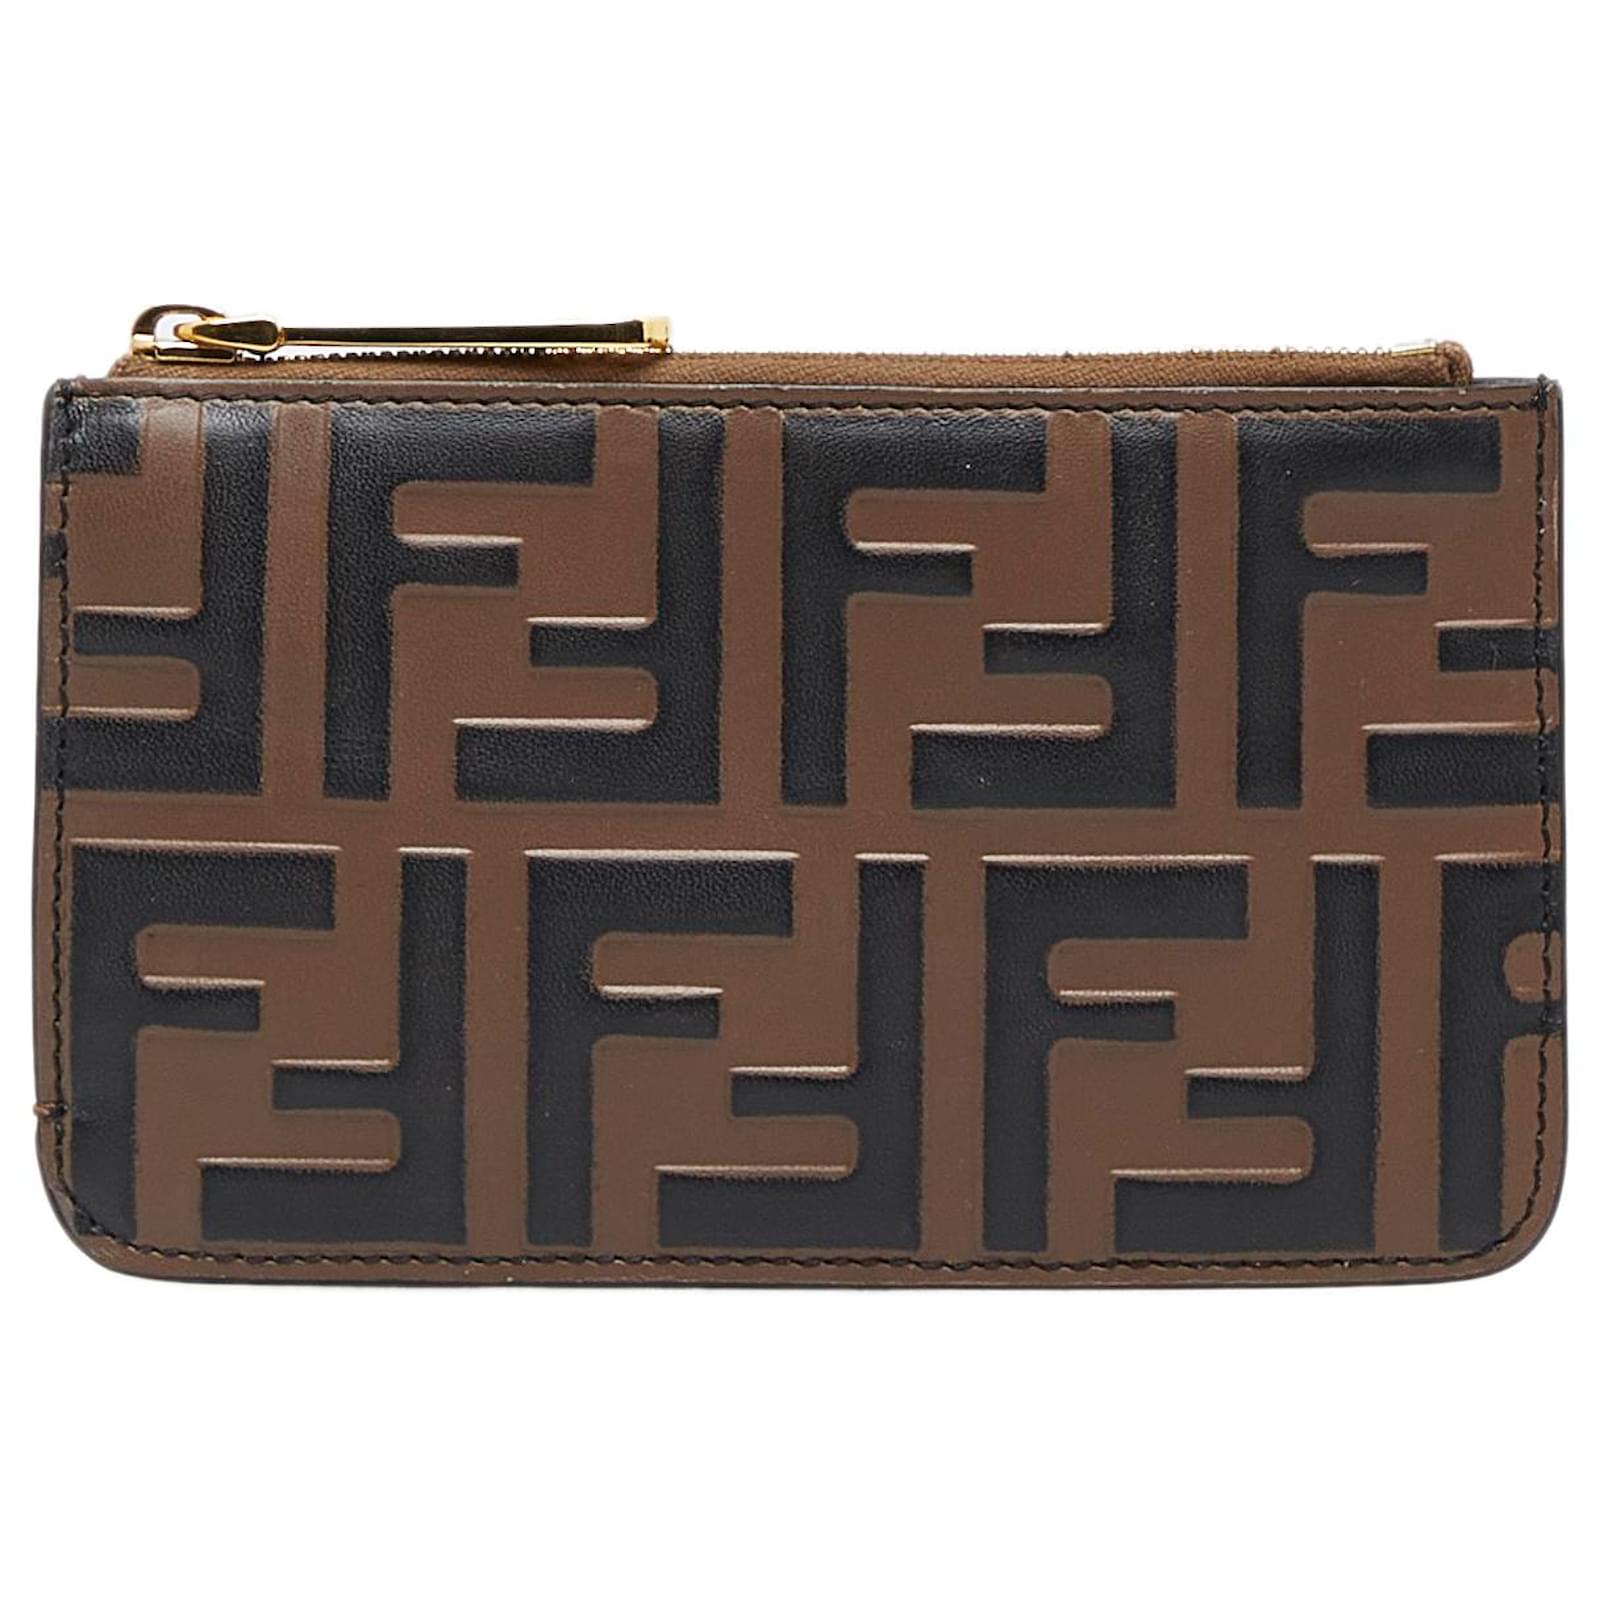 Fendi Zucca F Is Continental Wallet Embossed Leather Yellow Brown Auth  34531